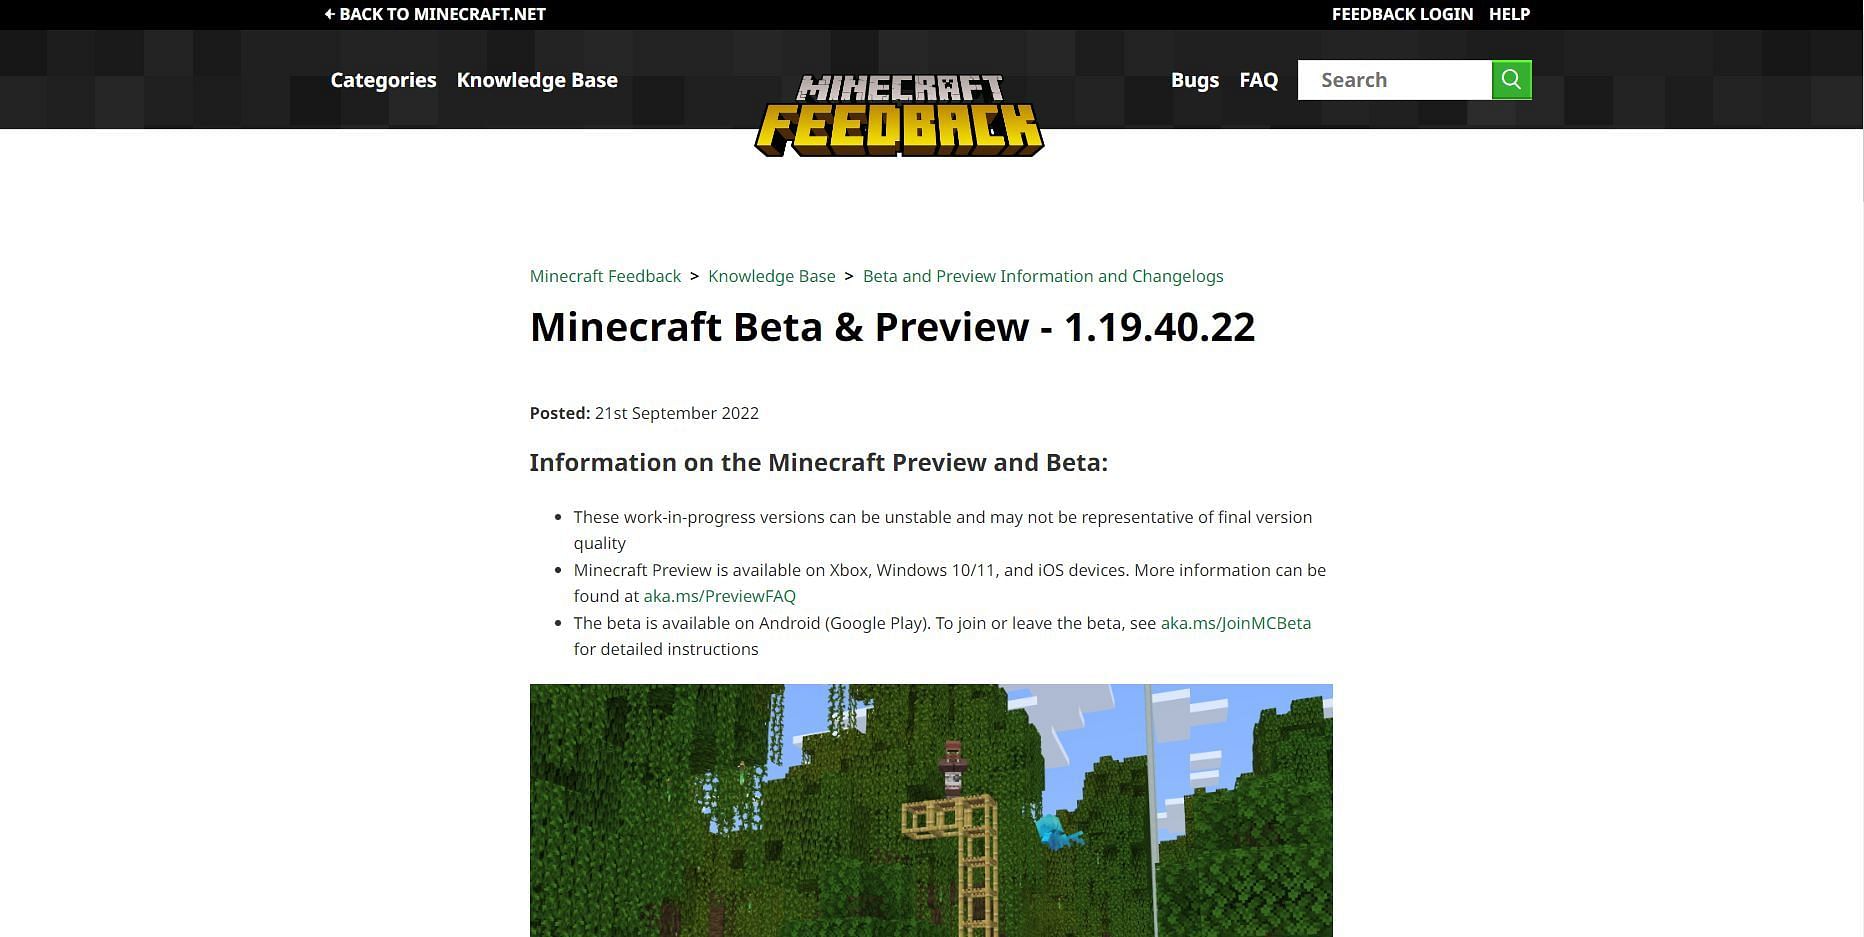 The official page for Minecraft Bedrock 1.19.40.22 (Image via Mojang)